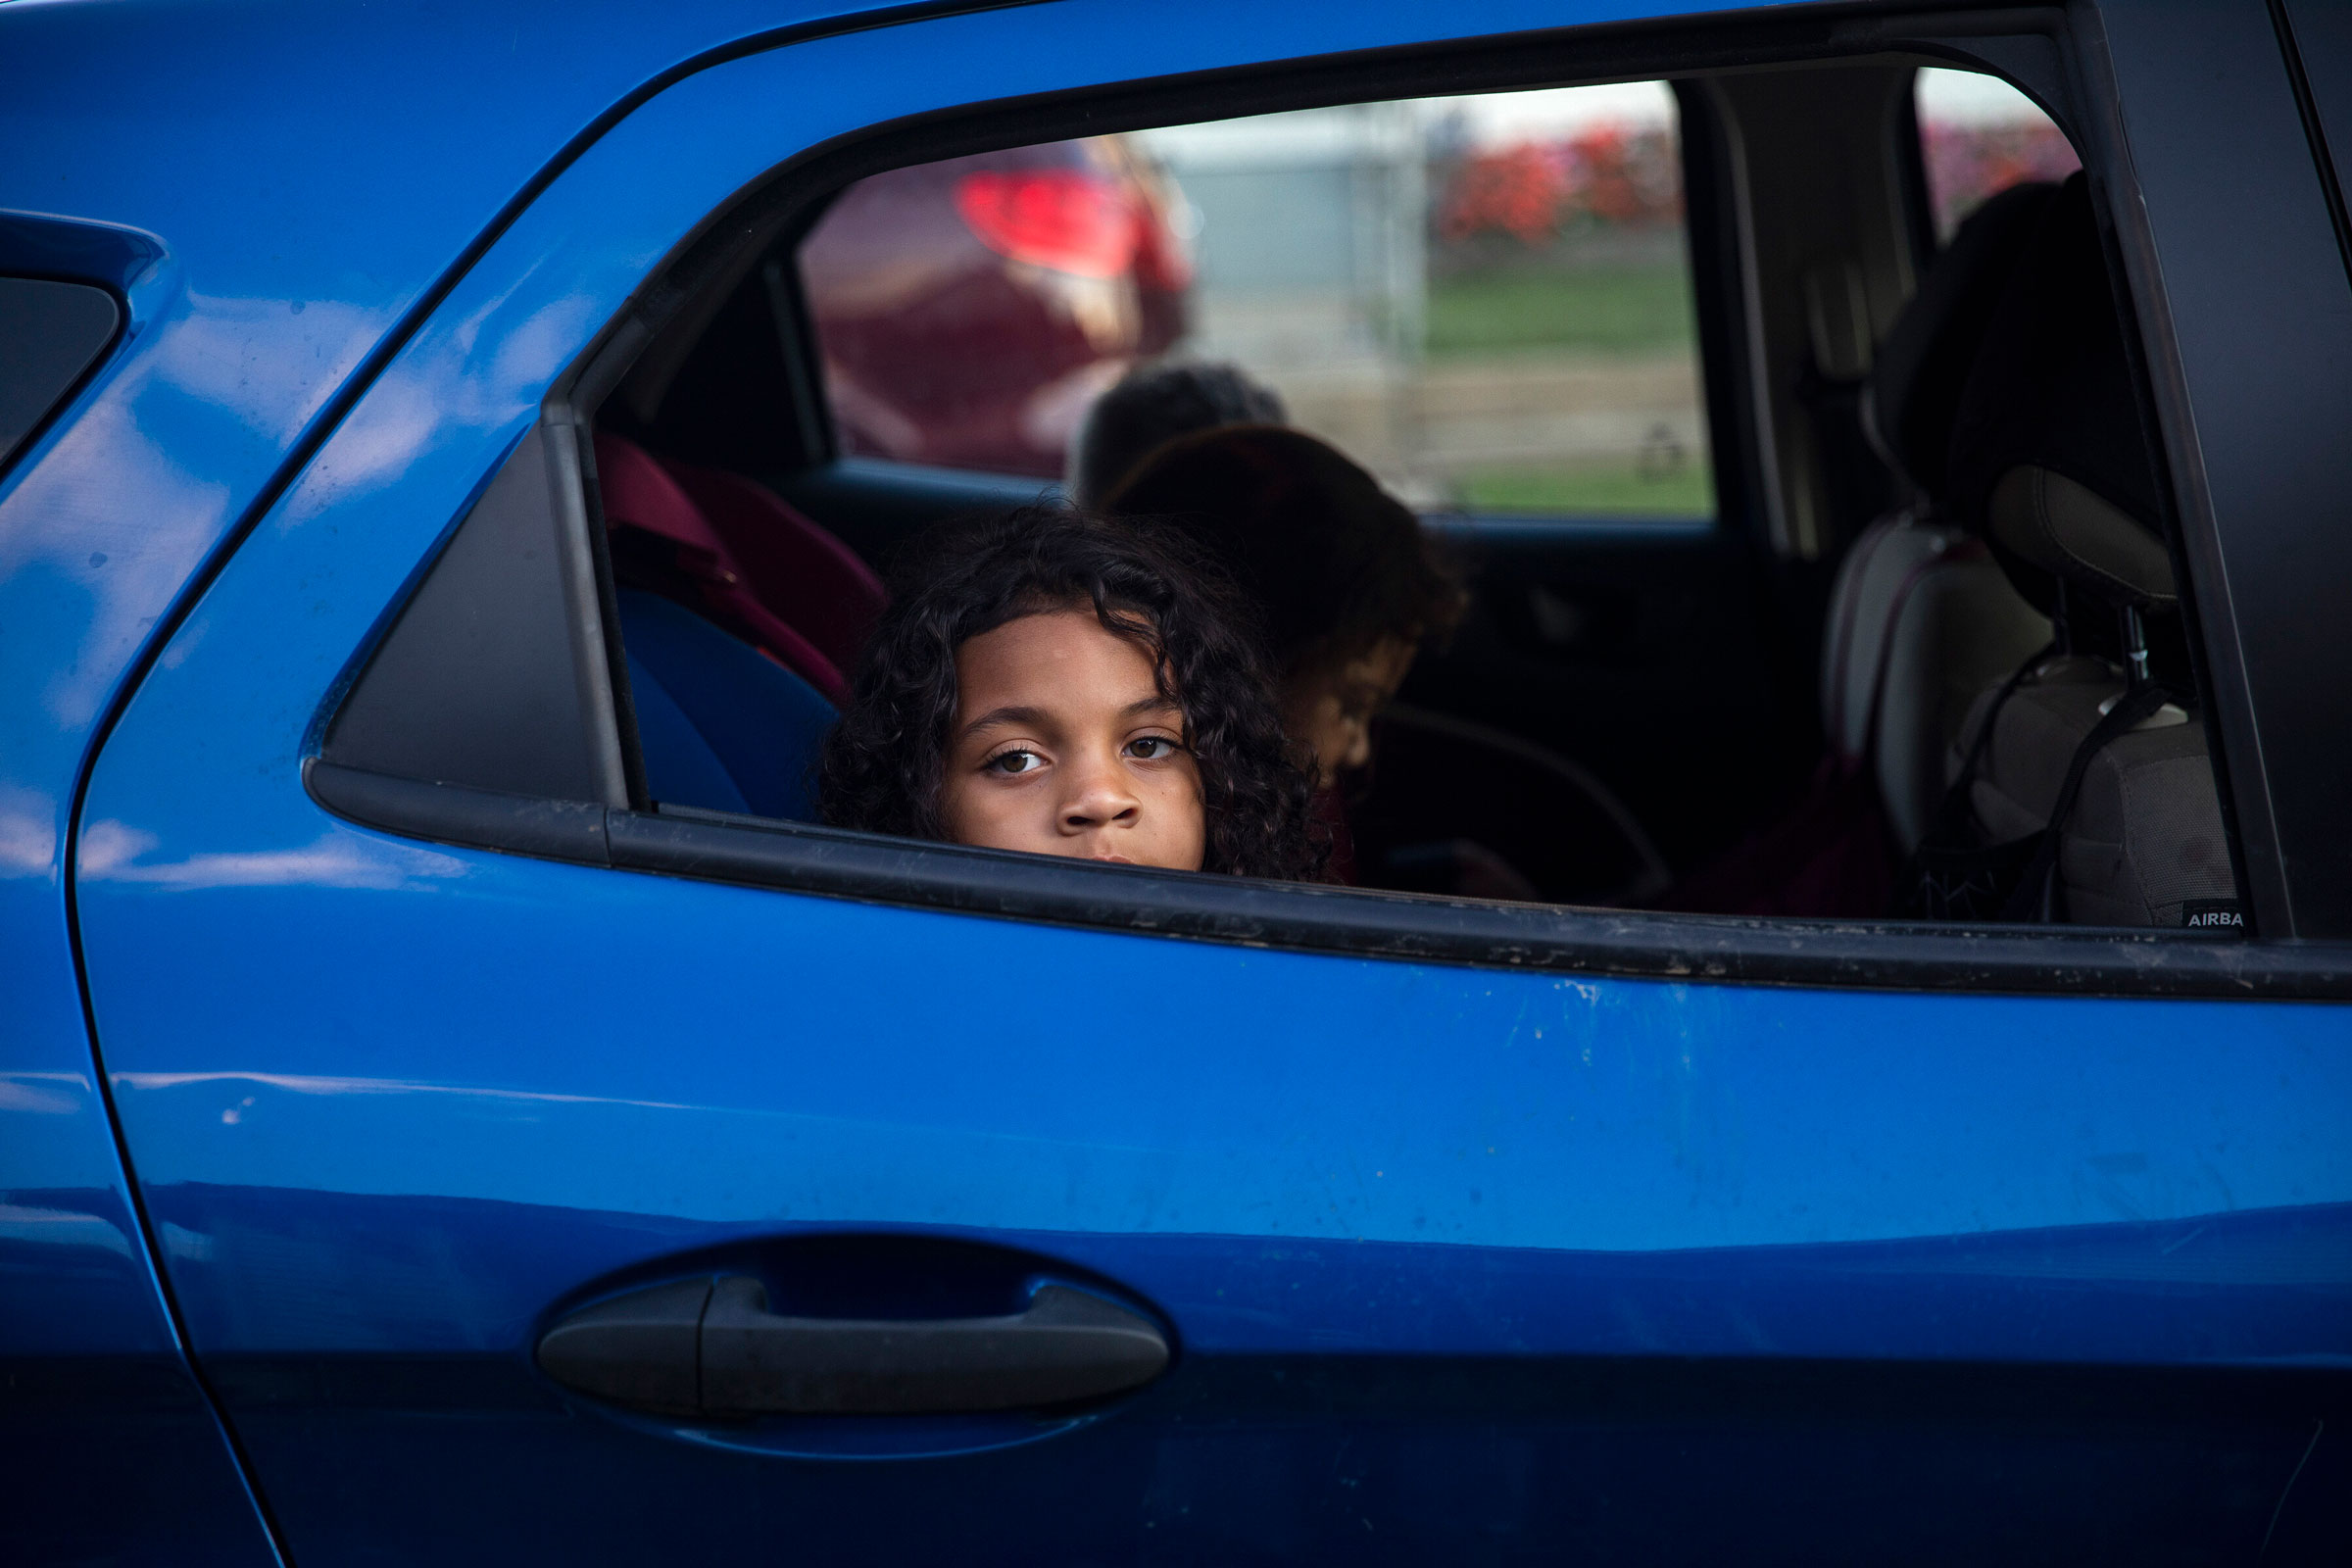 a young boy looks out the window of a blue car